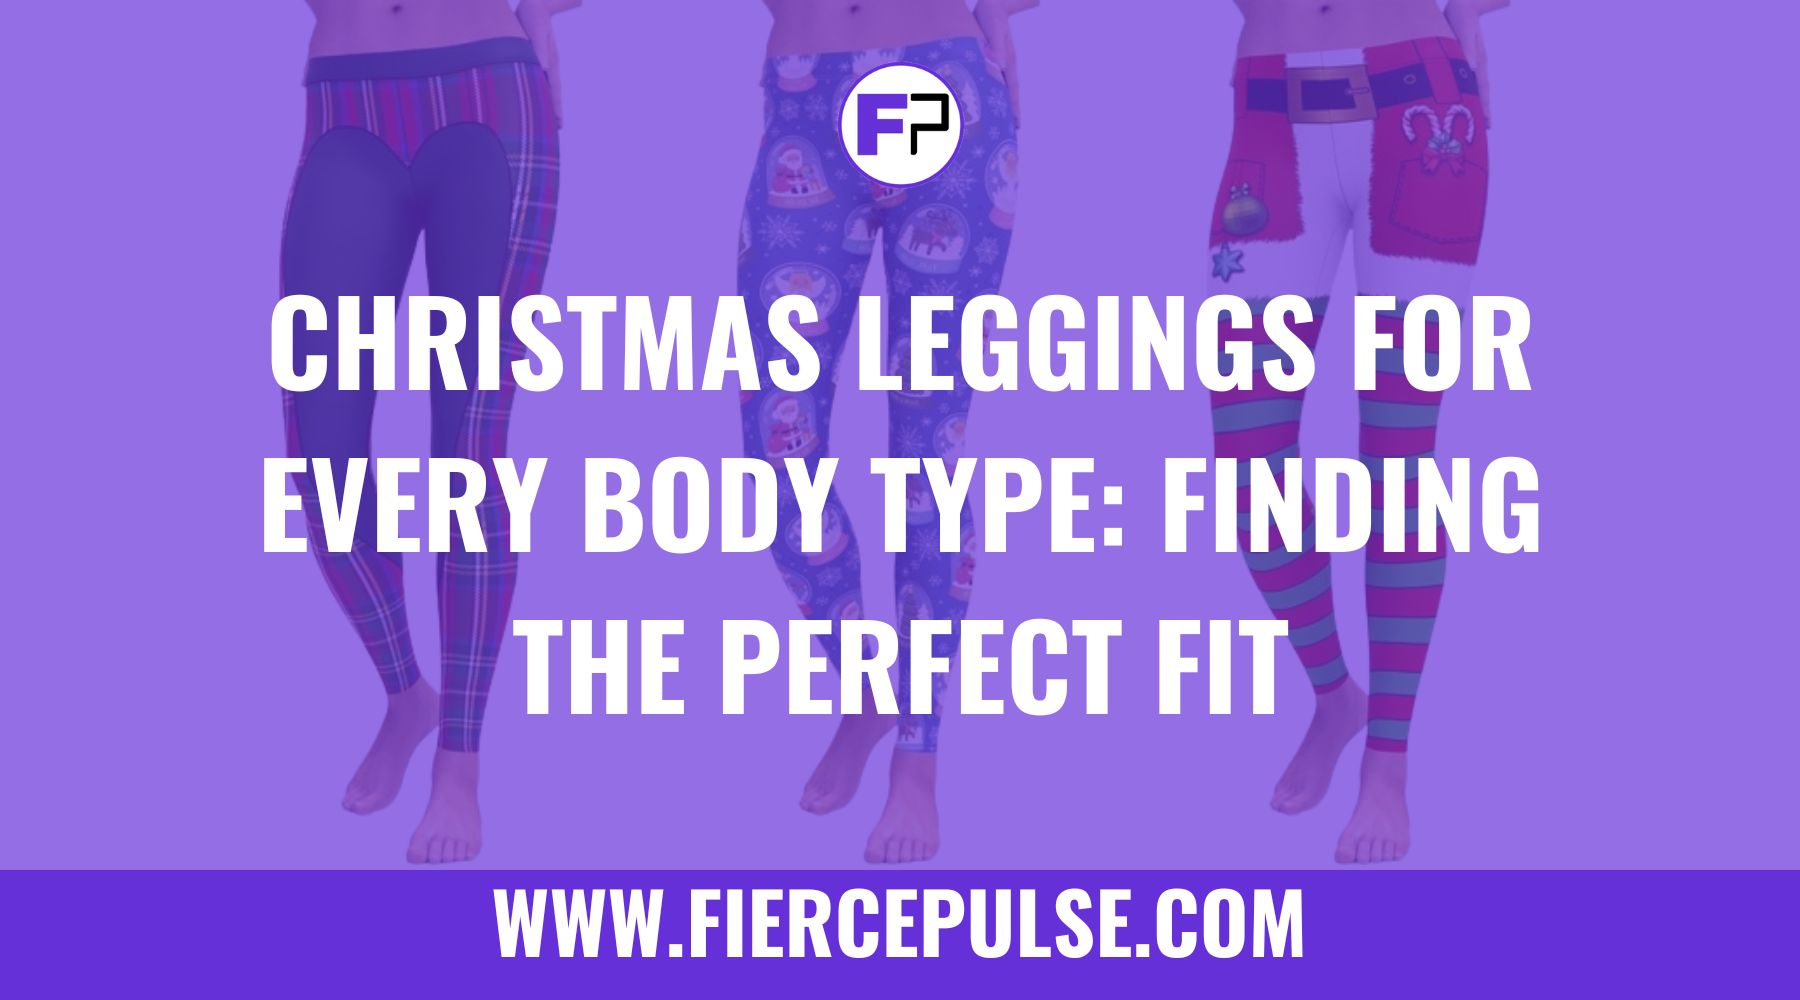 Christmas Leggings for Every Body Type: Finding the Perfect Fit